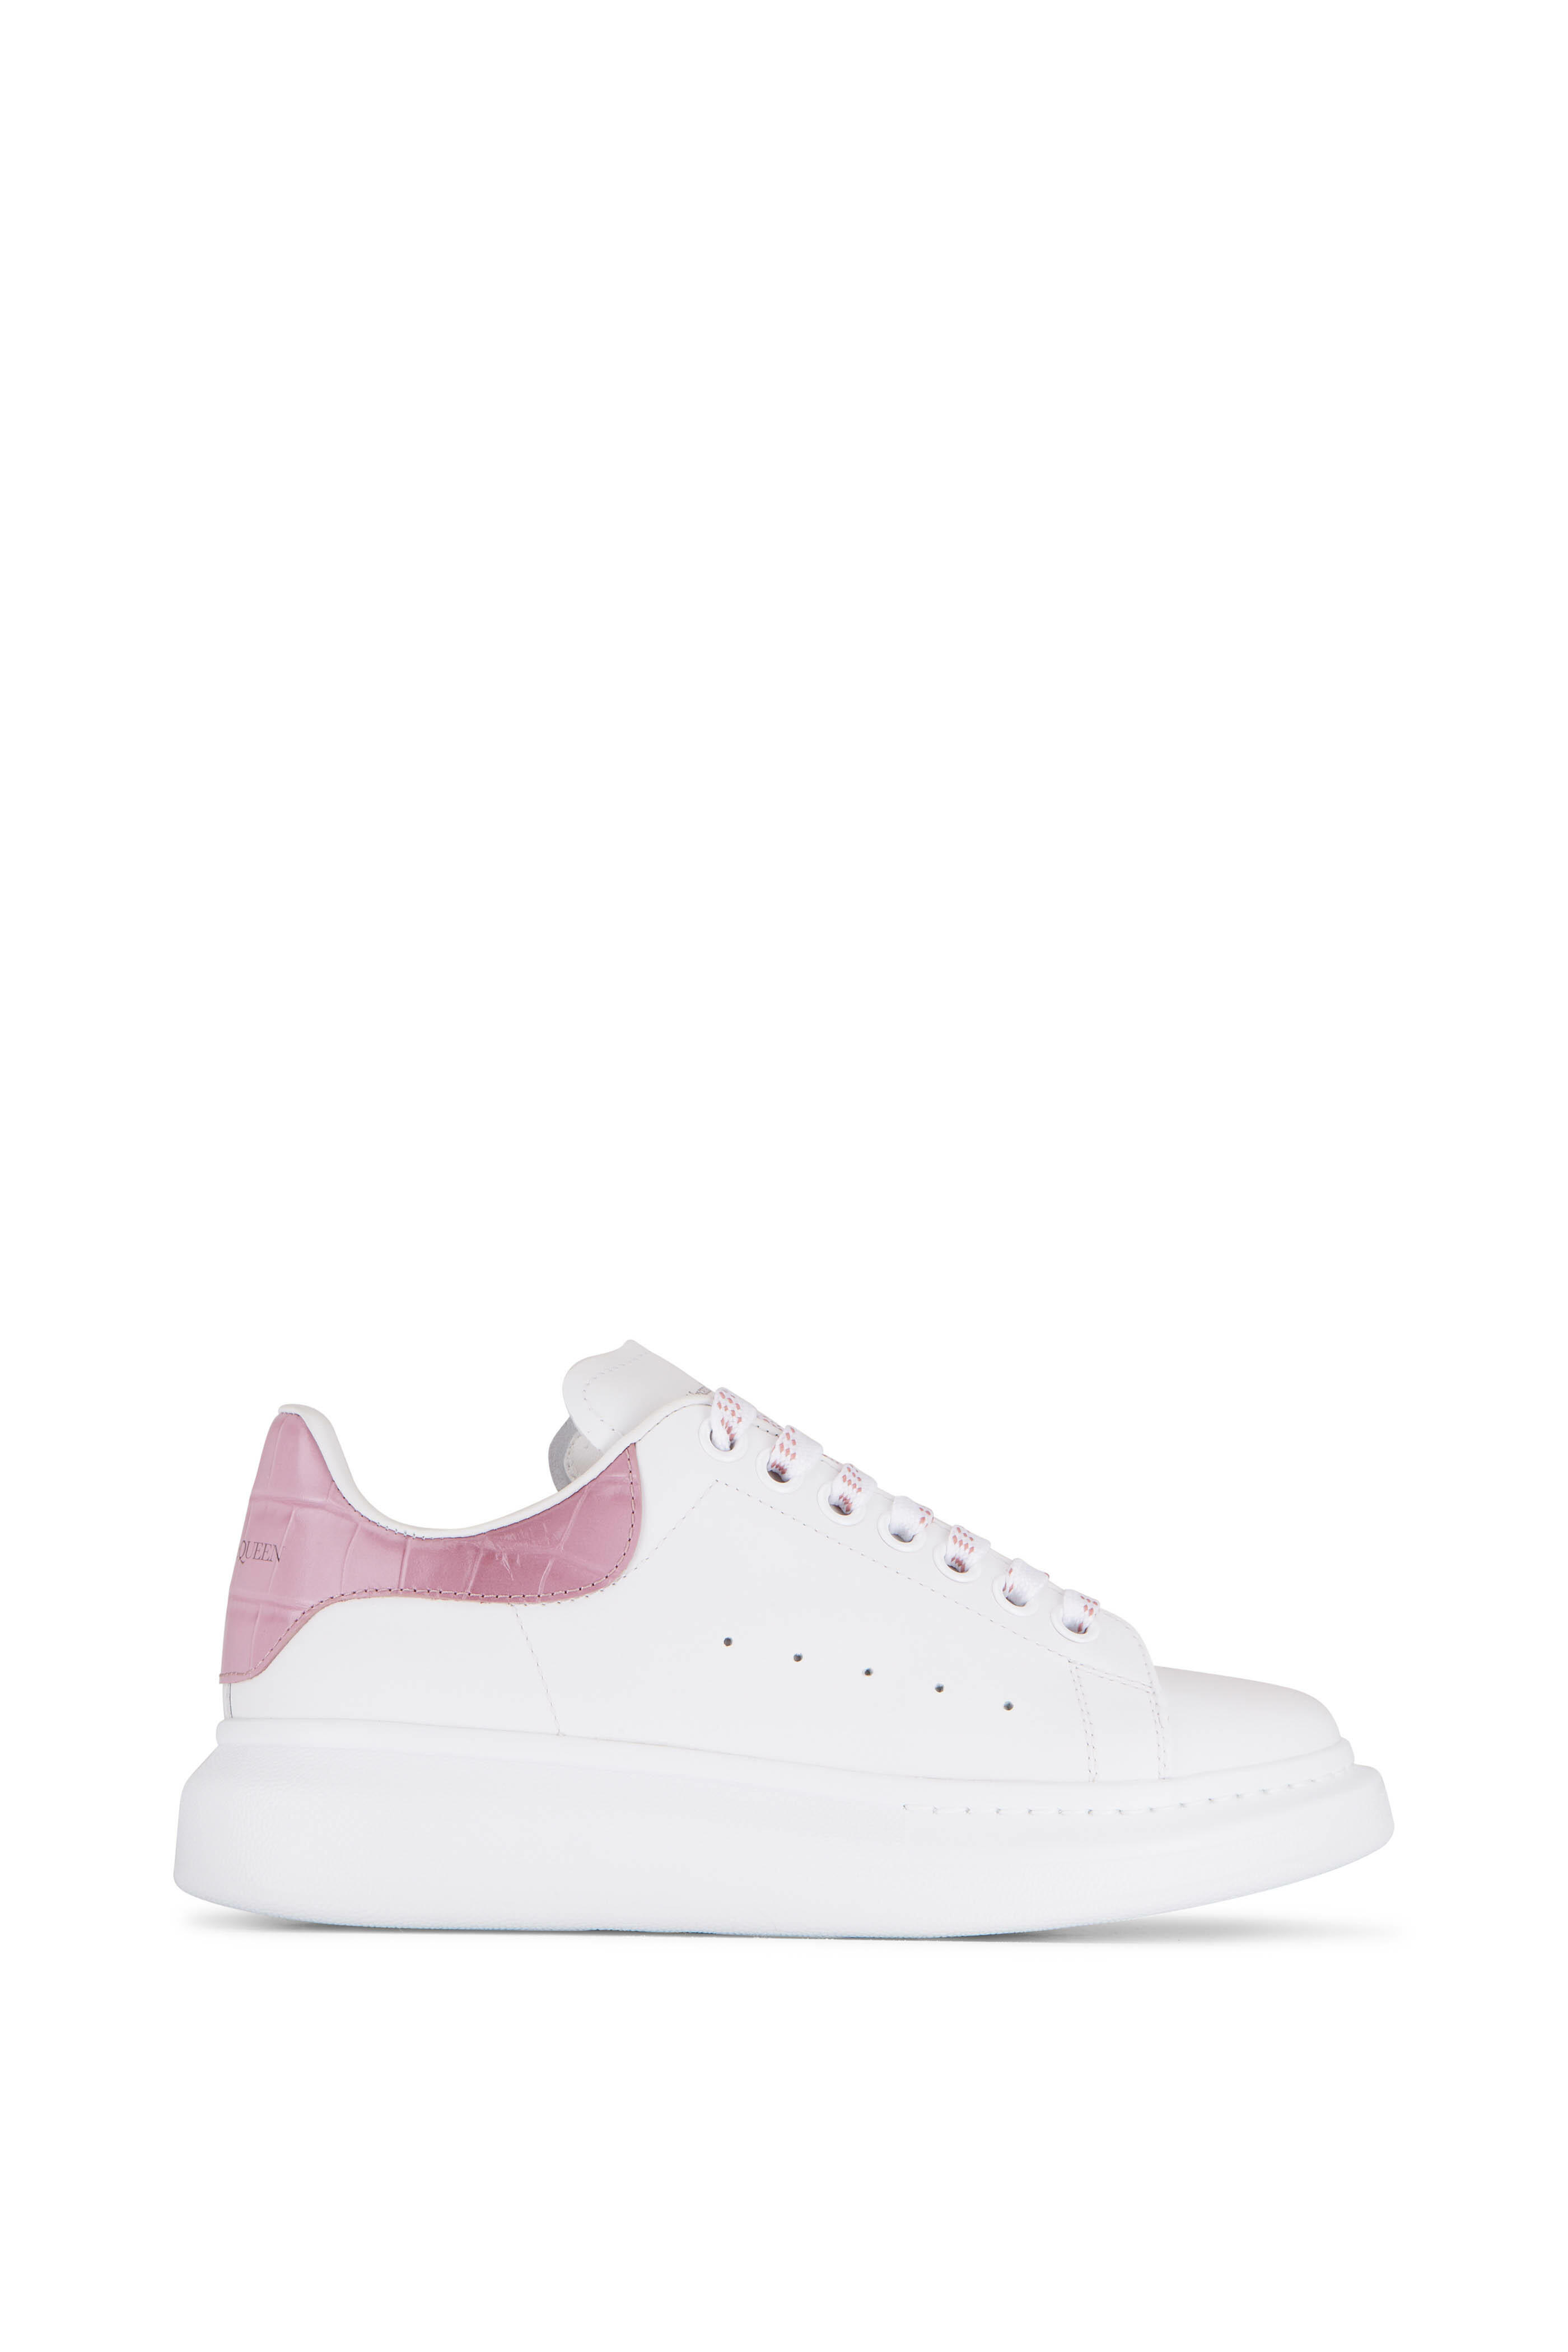 omgive Almægtig Akkumulerede Alexander McQueen - White Leather & Pink Exaggerated Sole Sneaker